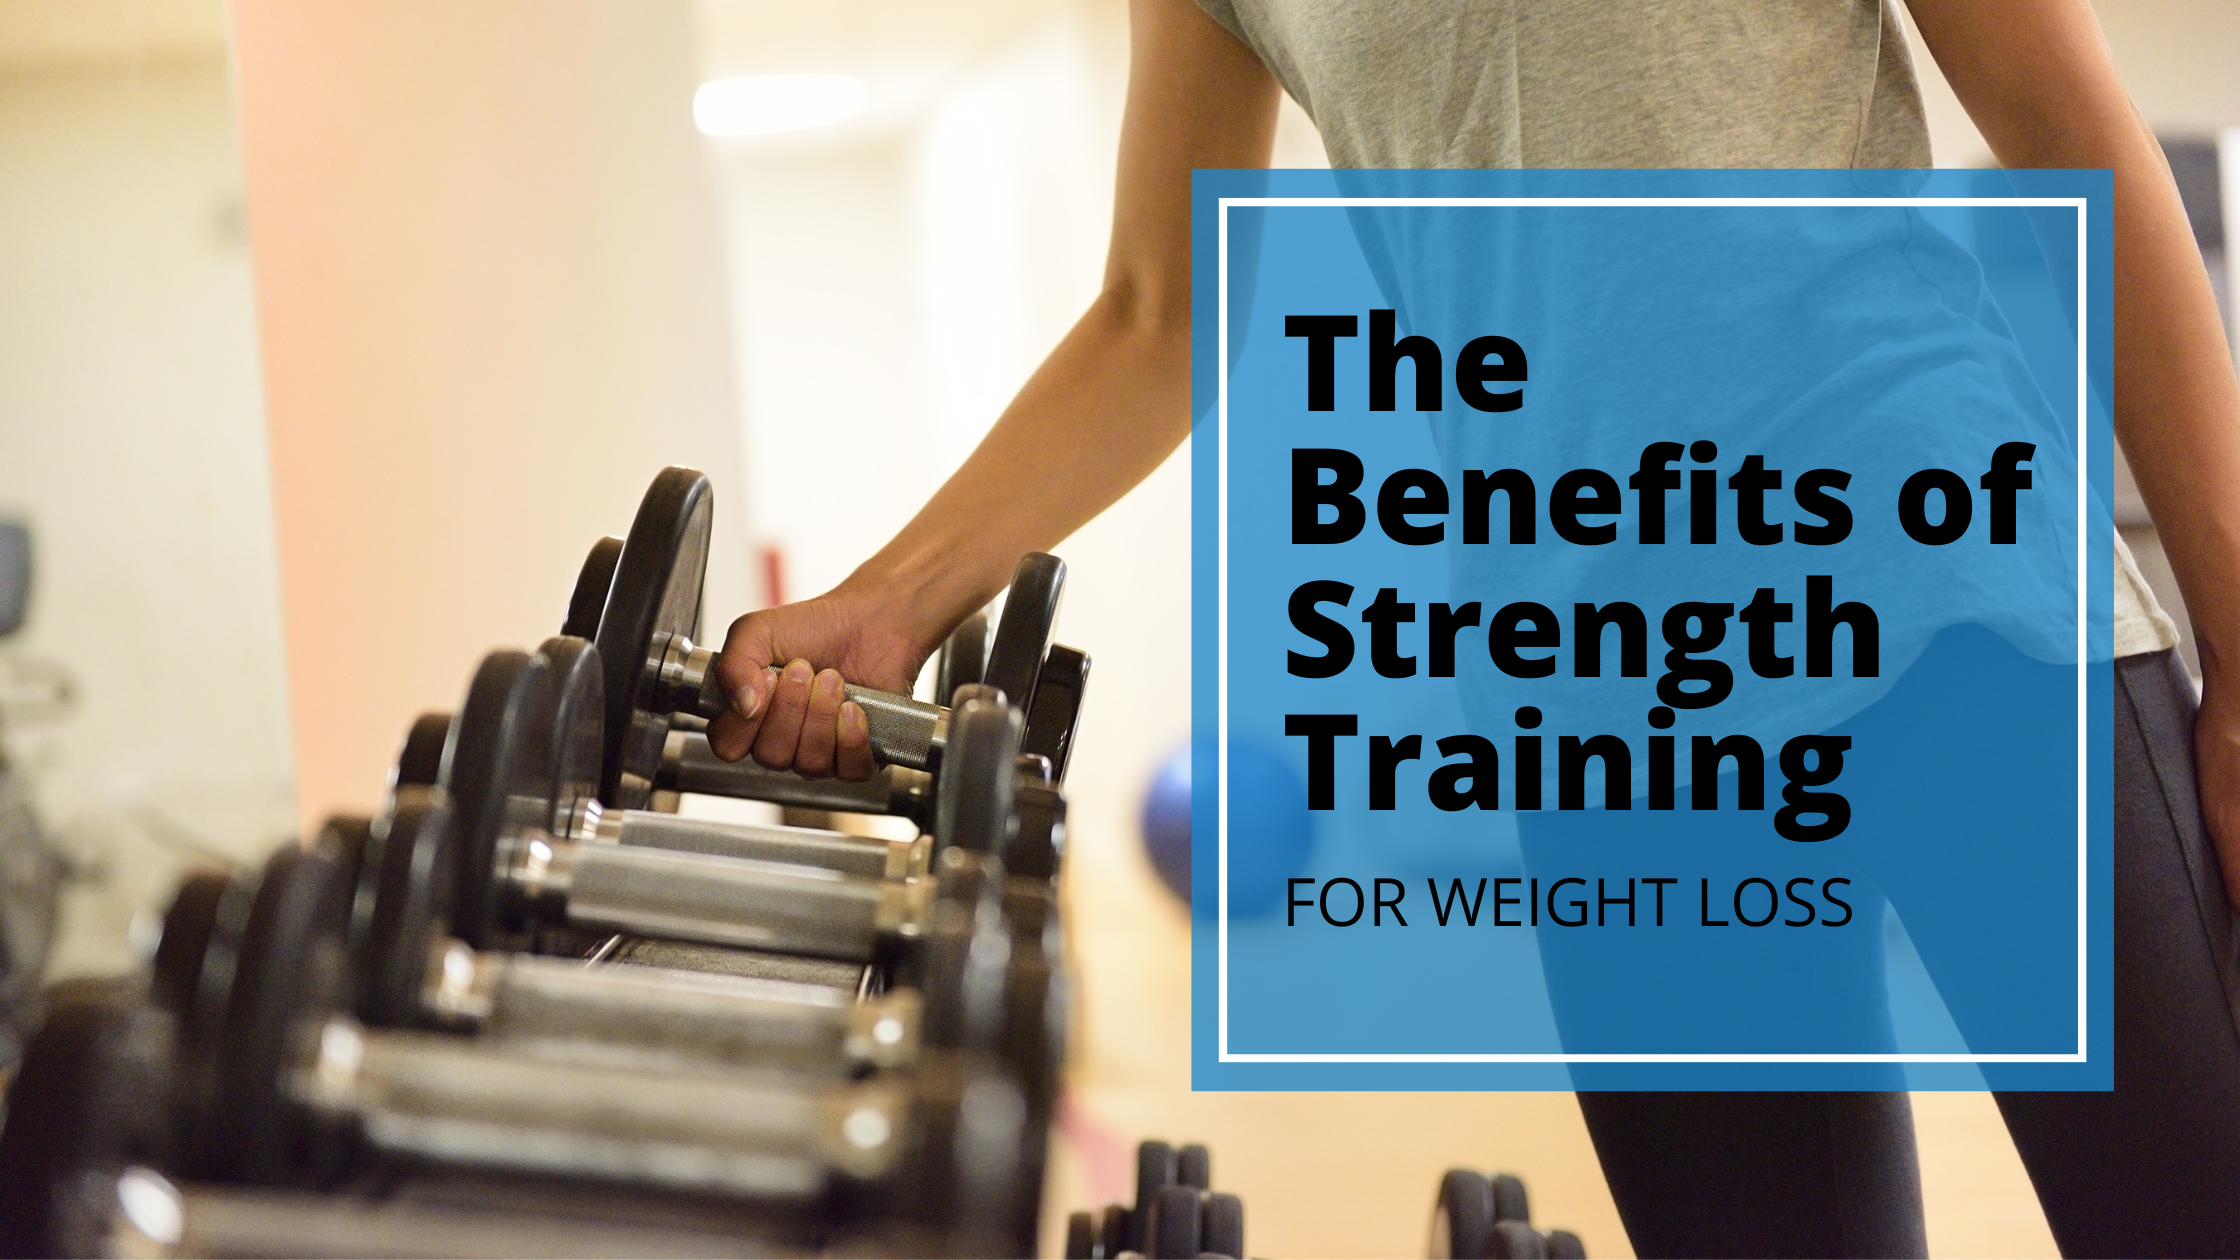 A woman is lifting a dumbell off a rack of dumbells. There is a text box that reads "The benefits of strength training for weight loss"